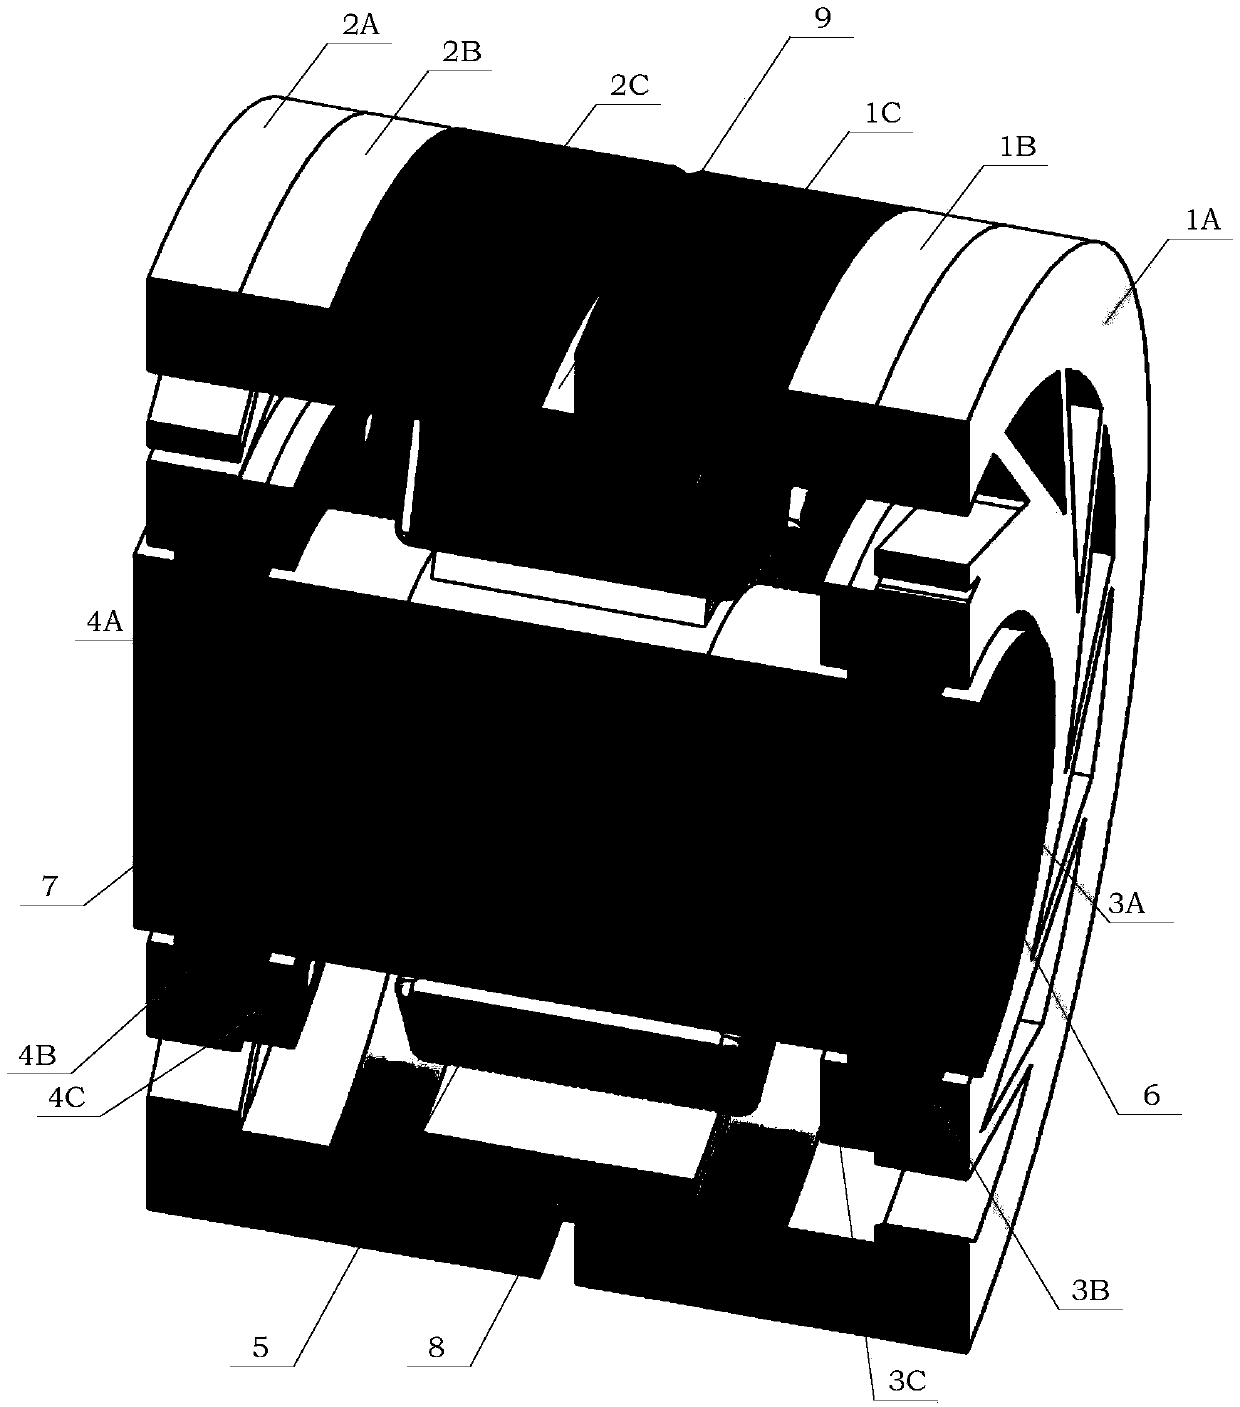 Orthogonal Magnetic Path Directional Magnetic Suspension Bearing Based on Symmetrical Self-lubricating Flexible Auxiliary Bearing Structure